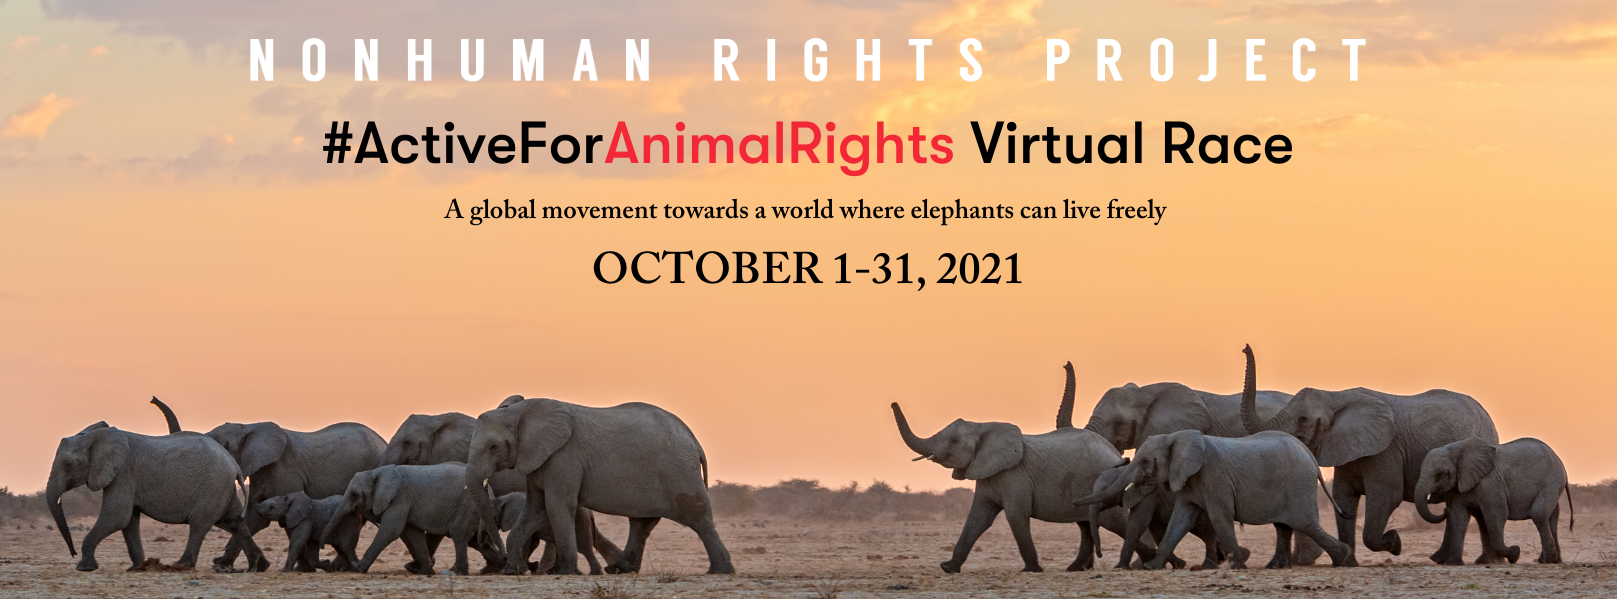 The NhRP's #ActiveForAnimalRights Virtual Race